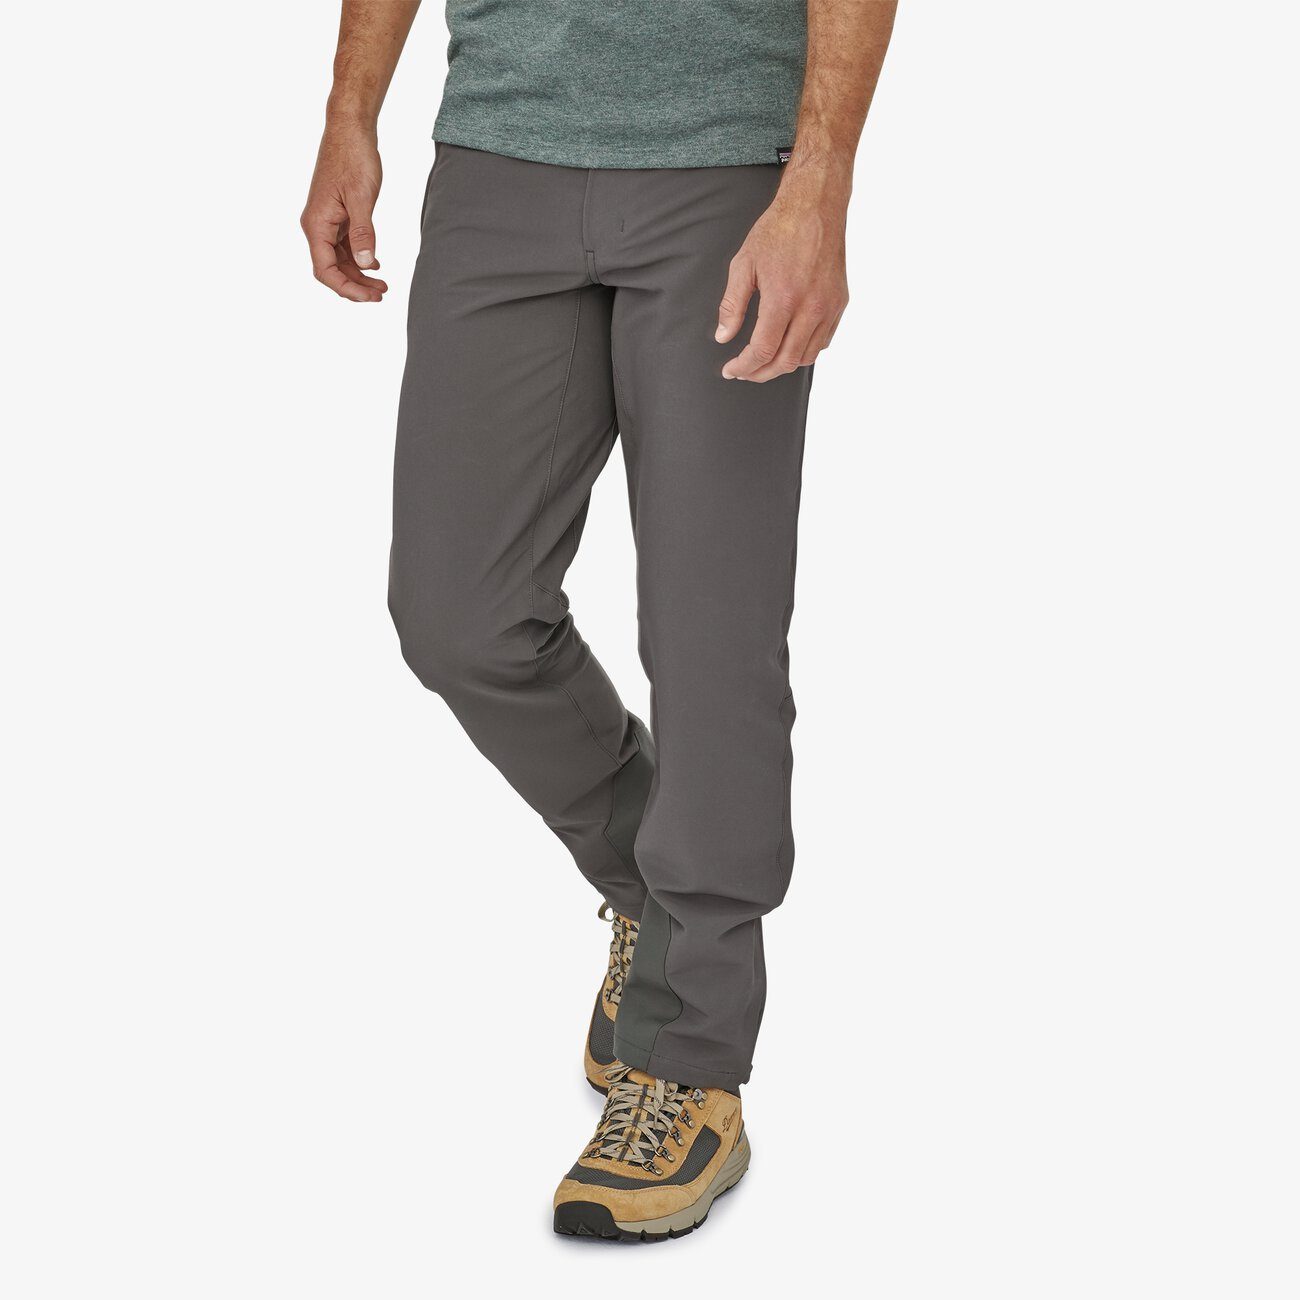 Patagonia M's Crestview Hiking Pants - Recycled Polyester Black Pants